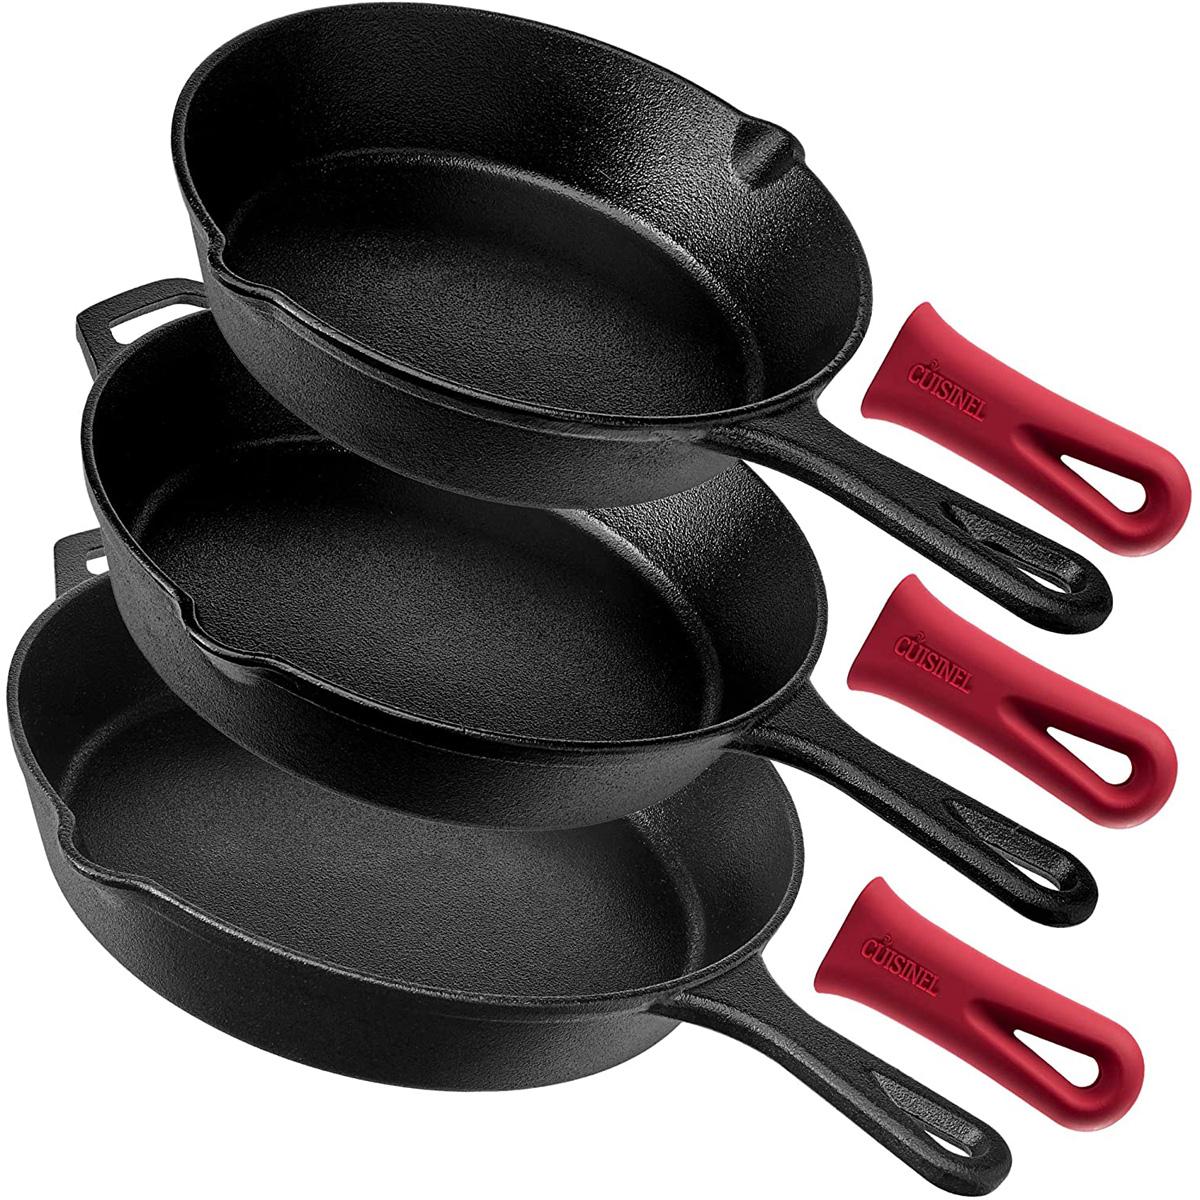 Pre-Seasoned Cast Iron Skillet 3-Piece Chef Set for $39.99 Shipped